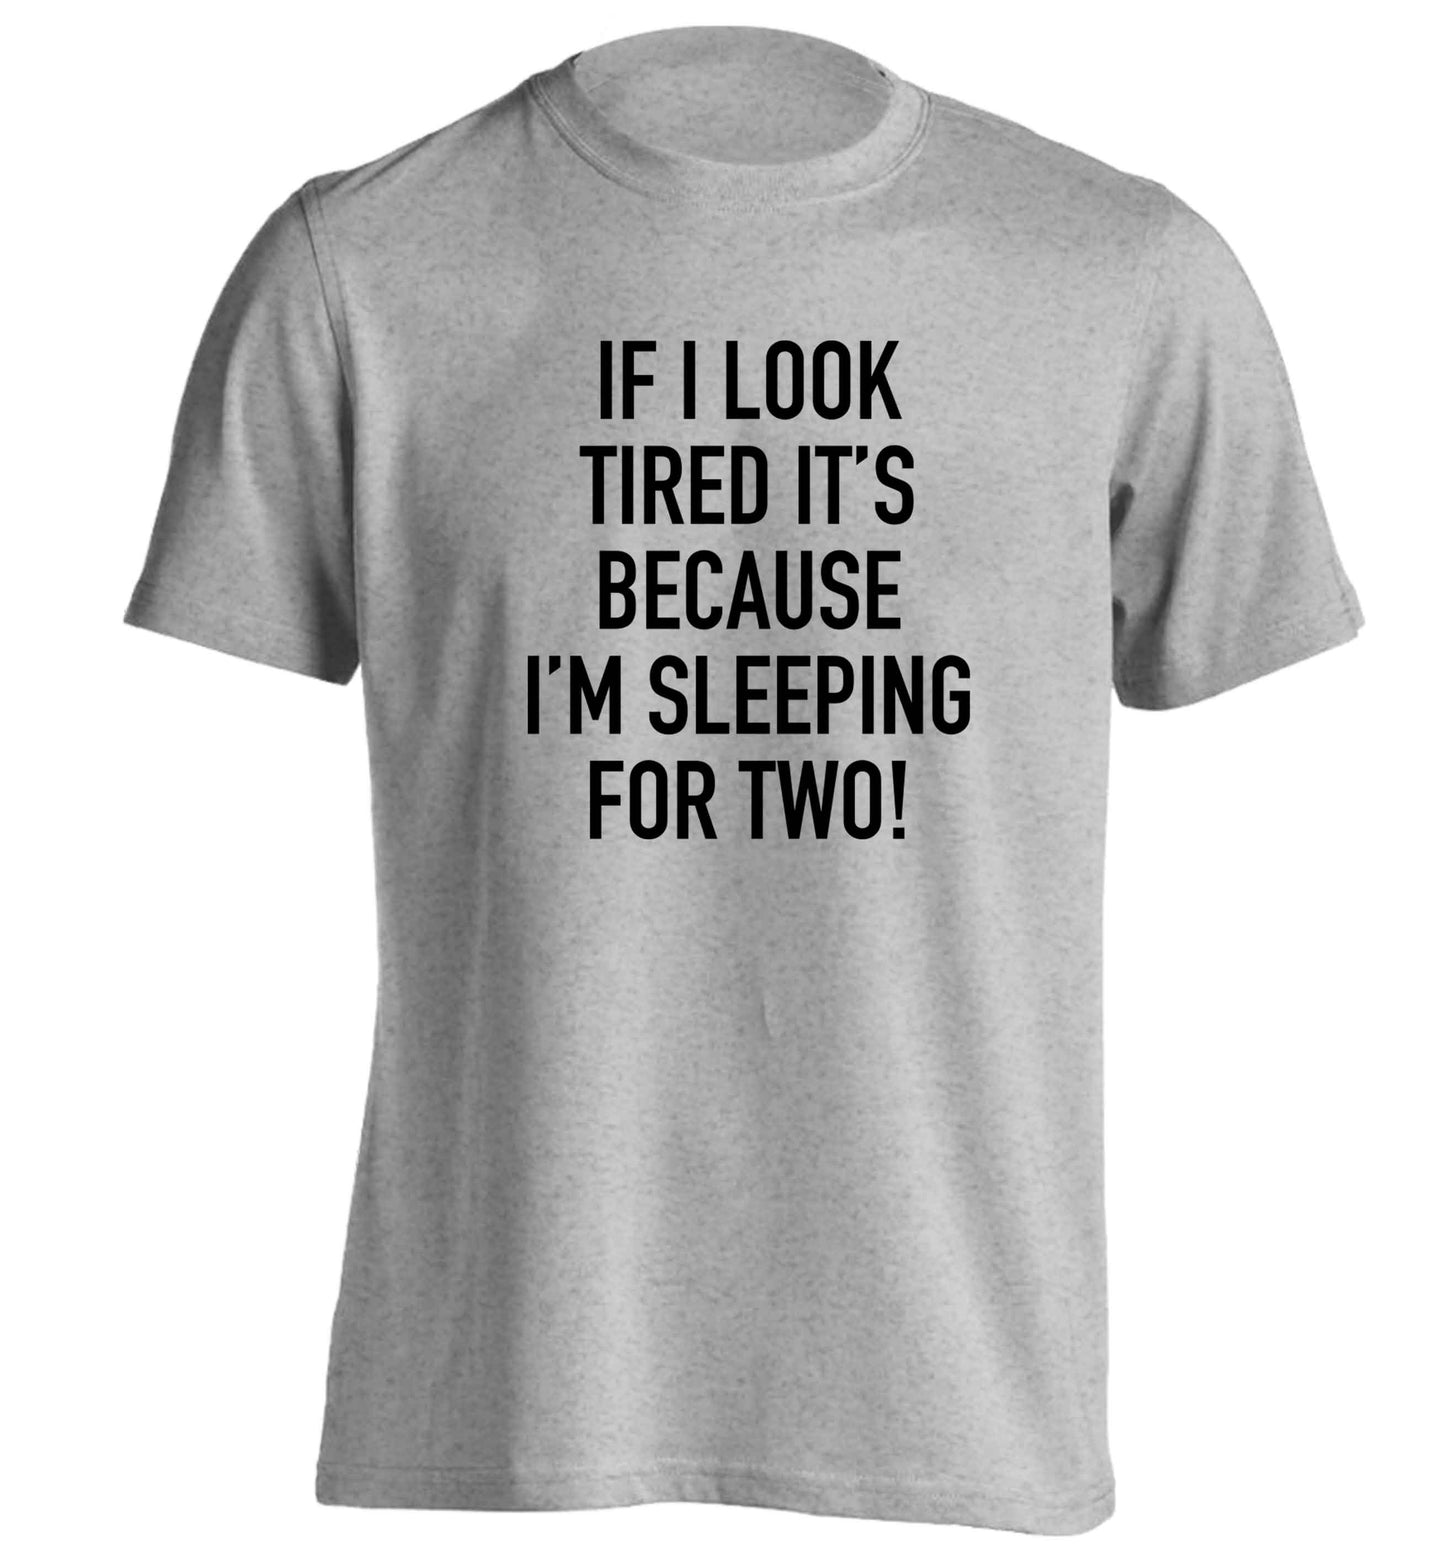 If I look tired it's because I'm sleeping for two adults unisex grey Tshirt 2XL